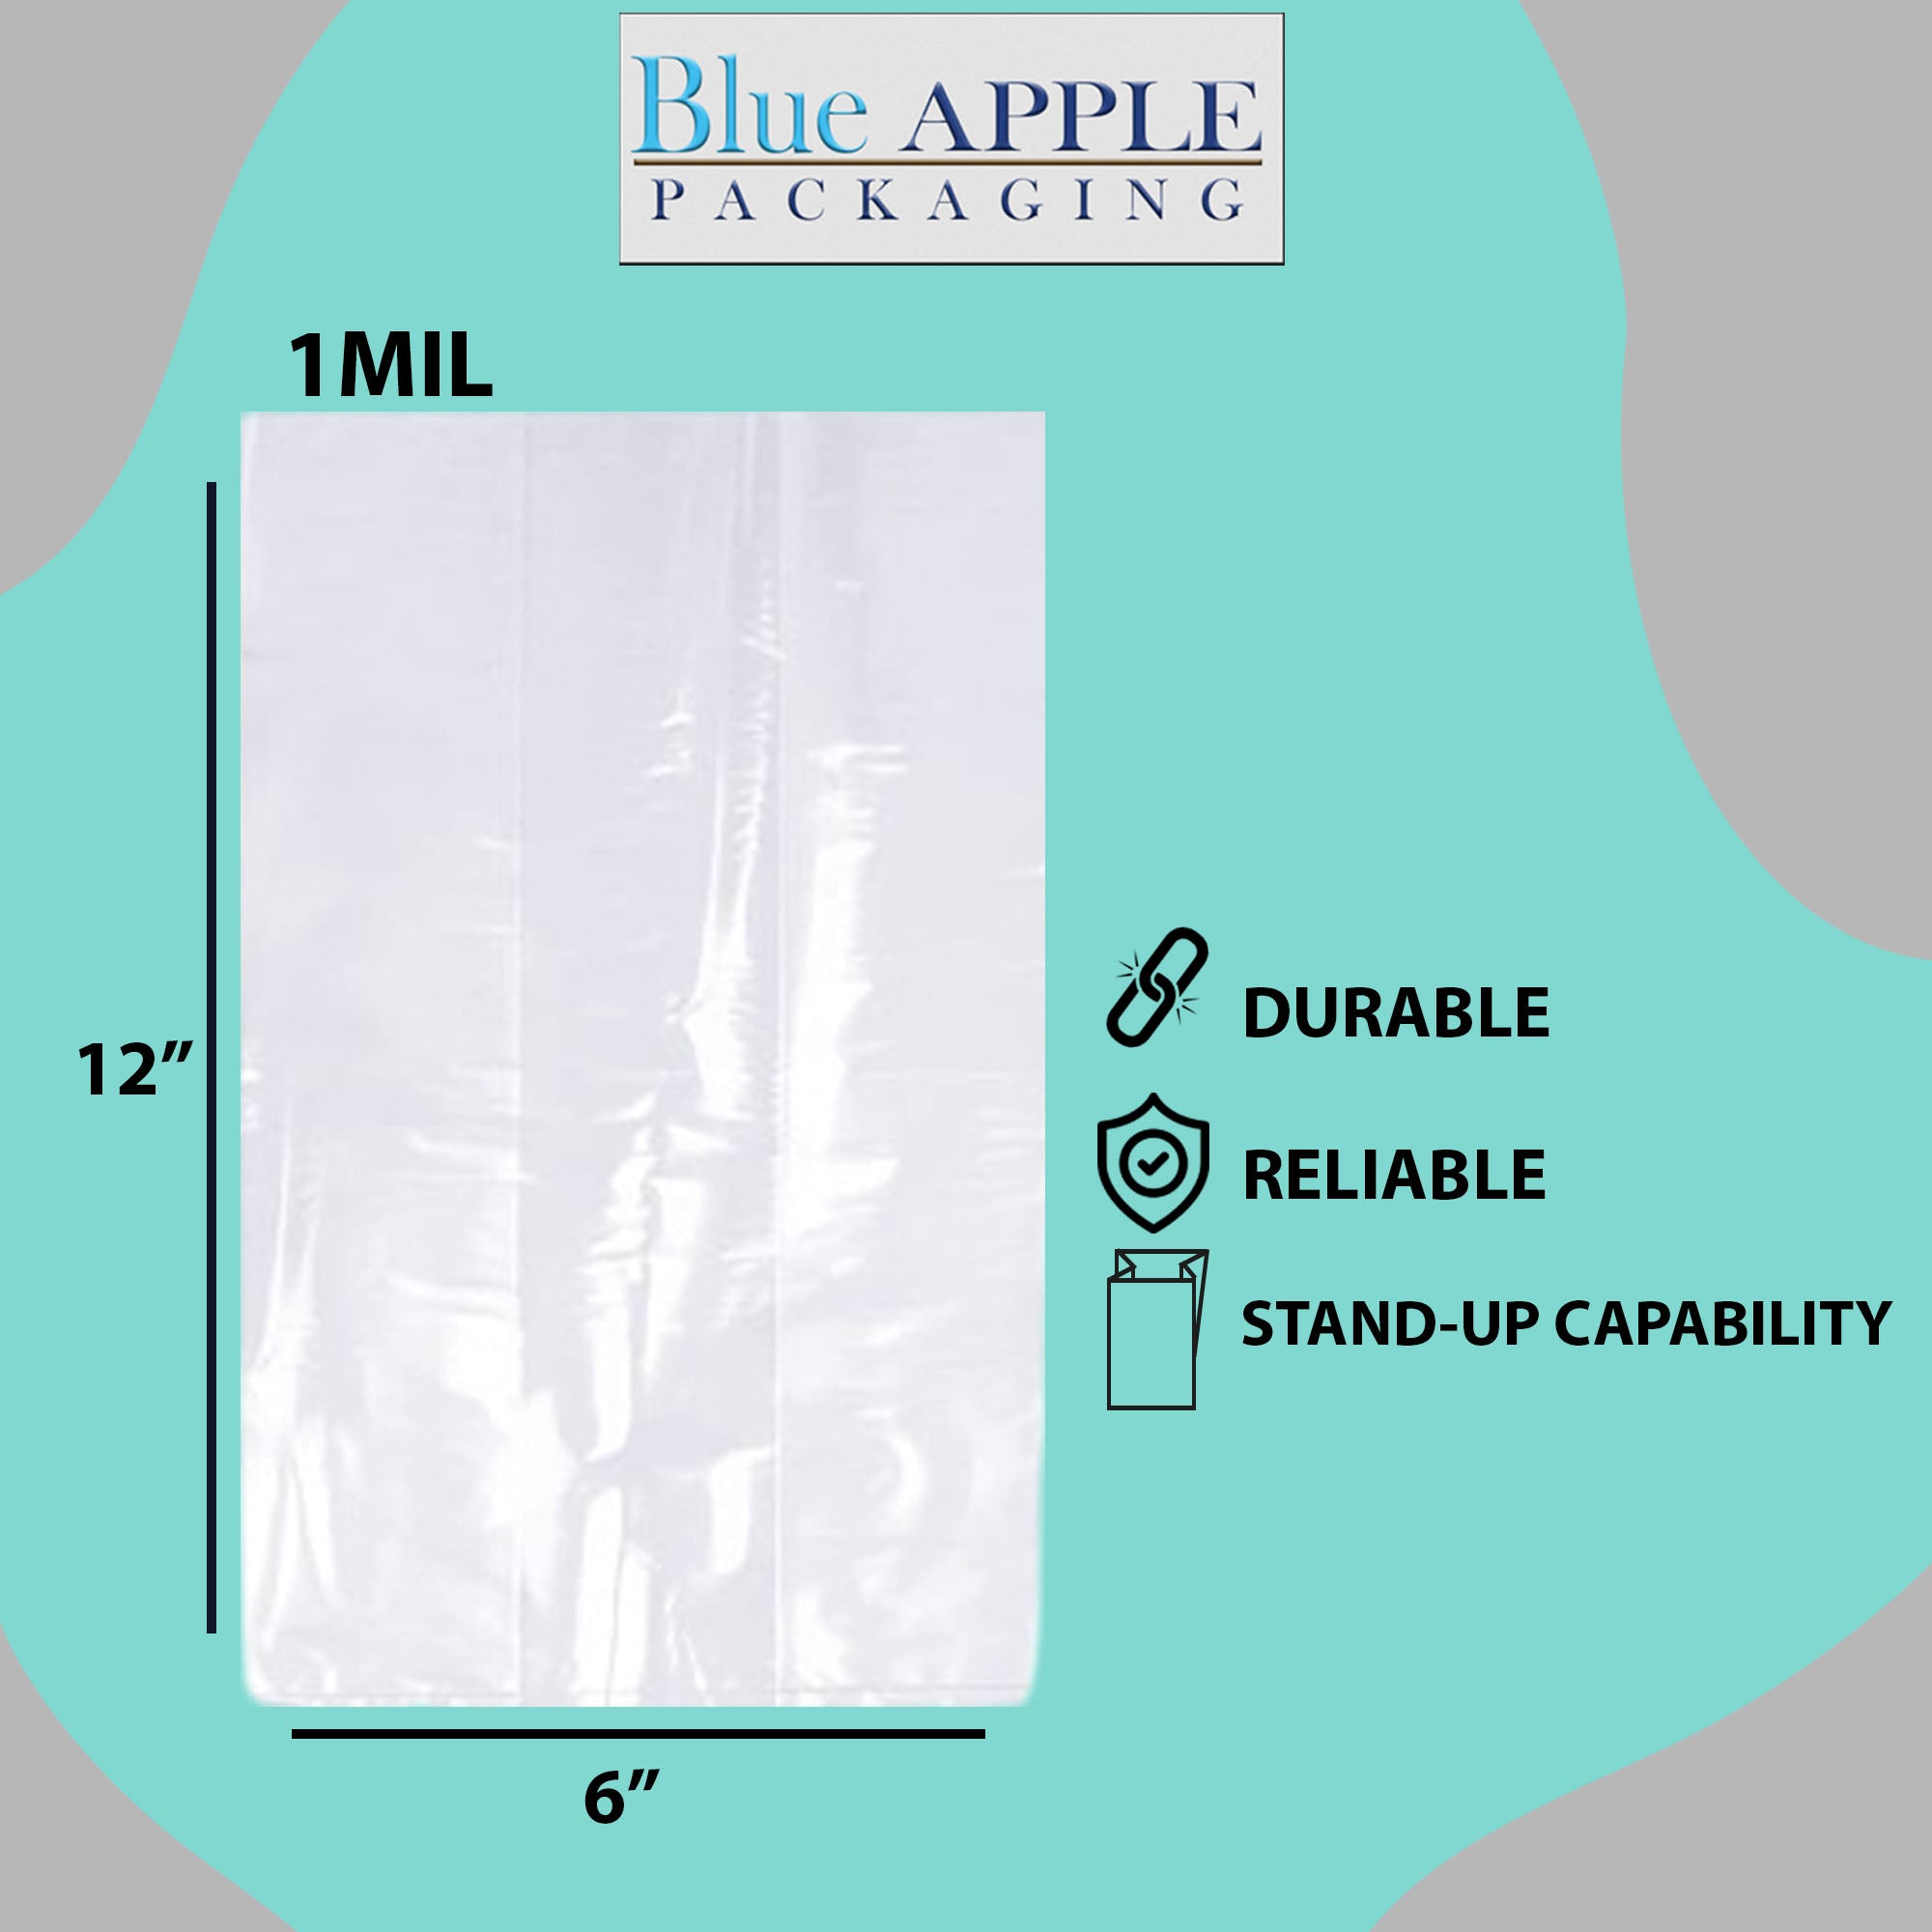 Clear Gusseted Poly Bags 1 Mil Size 6X3X12 Flat Bottom Heat Seal